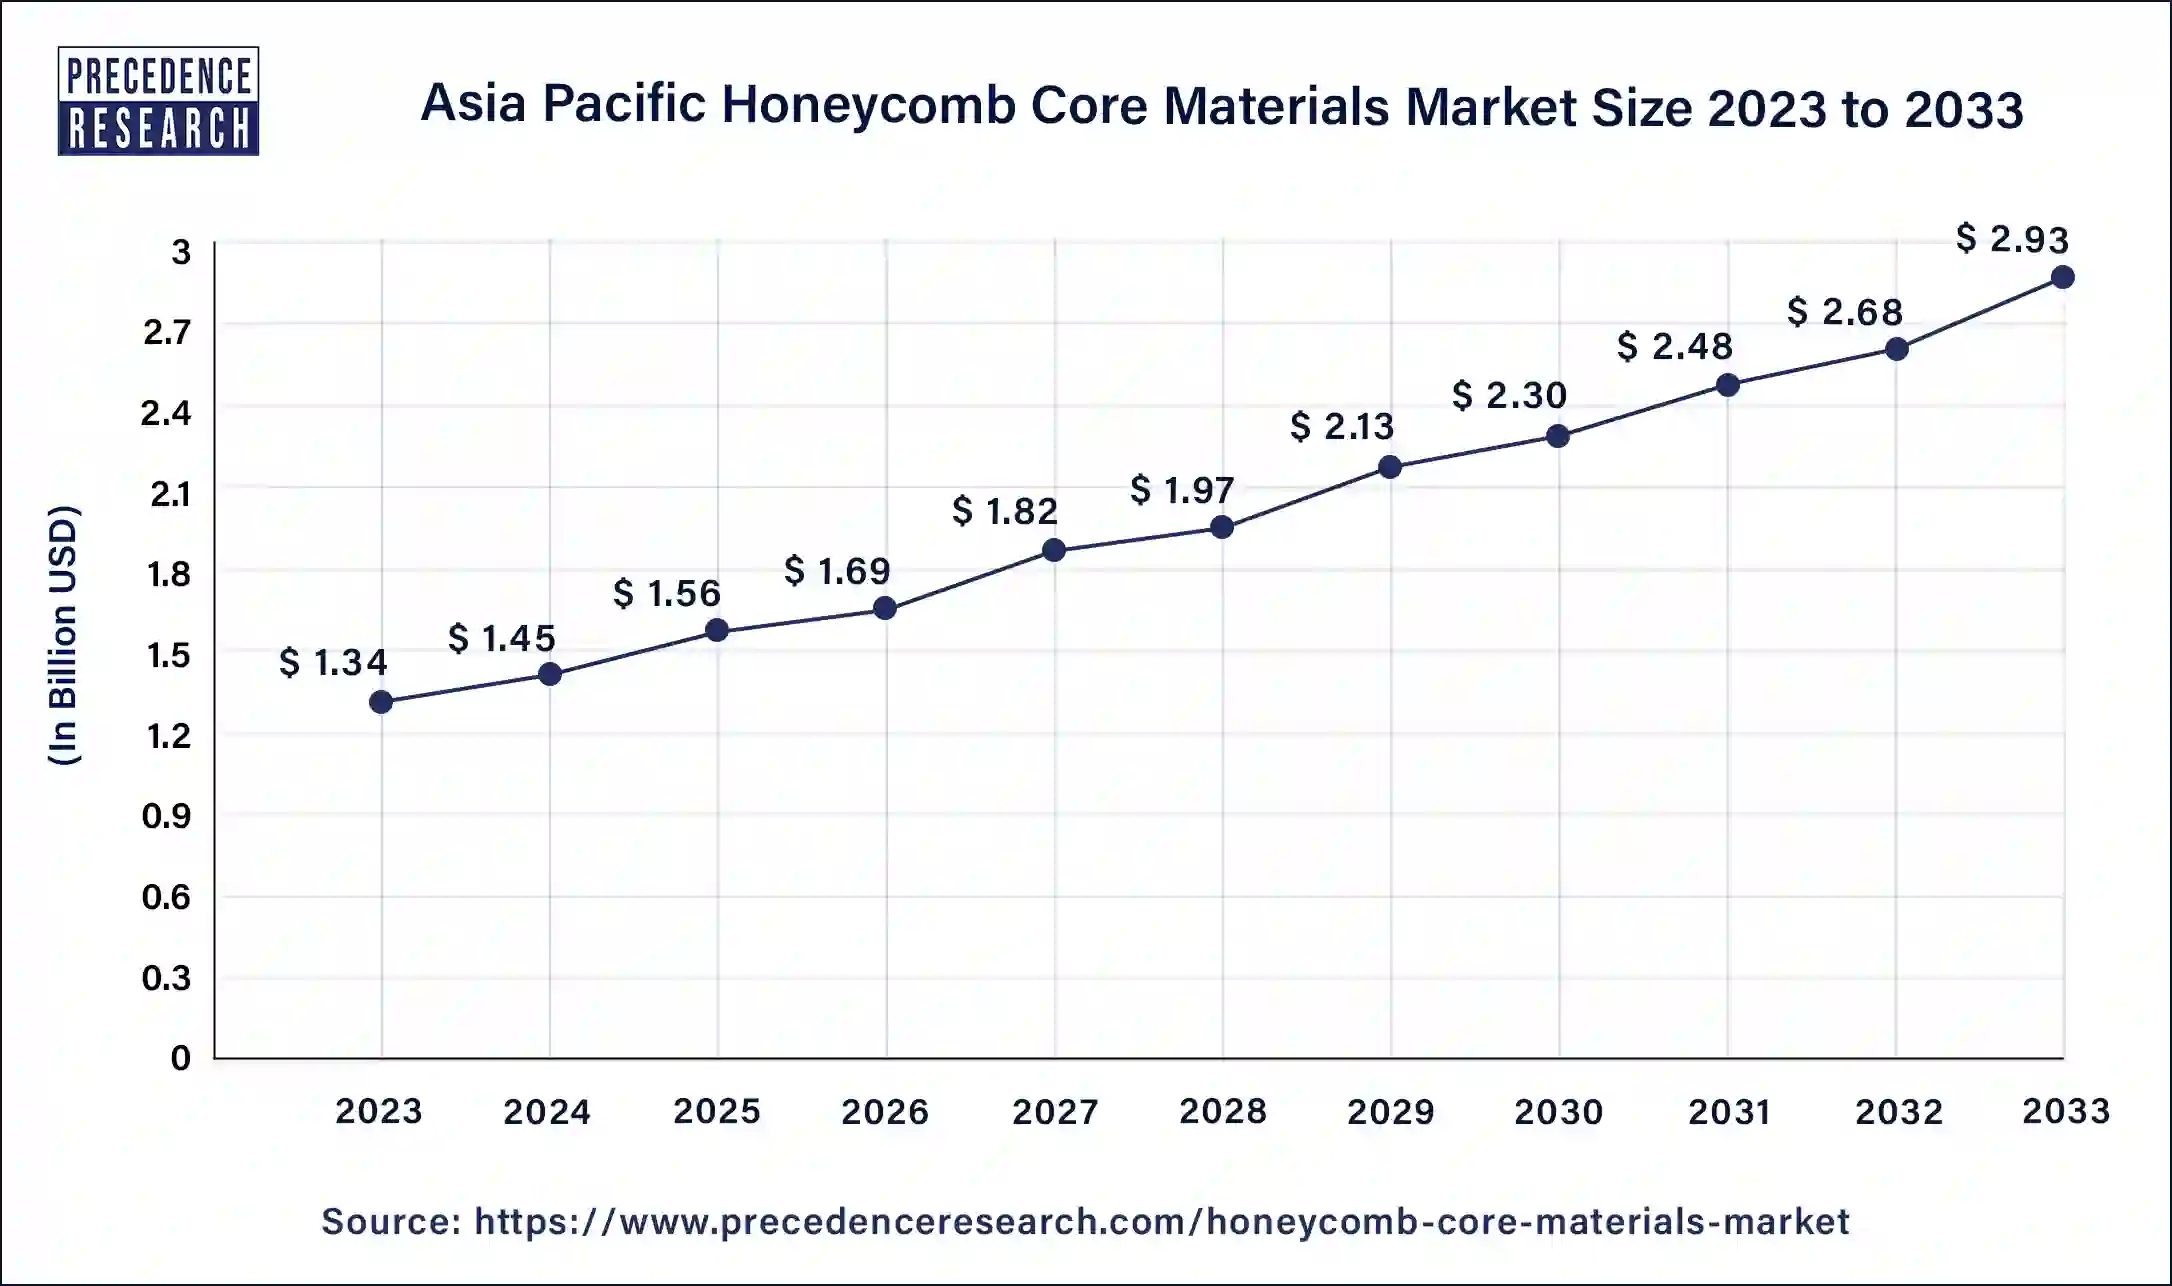 Asia Pacific Honeycomb Core Materials Market Size 2024 to 2033